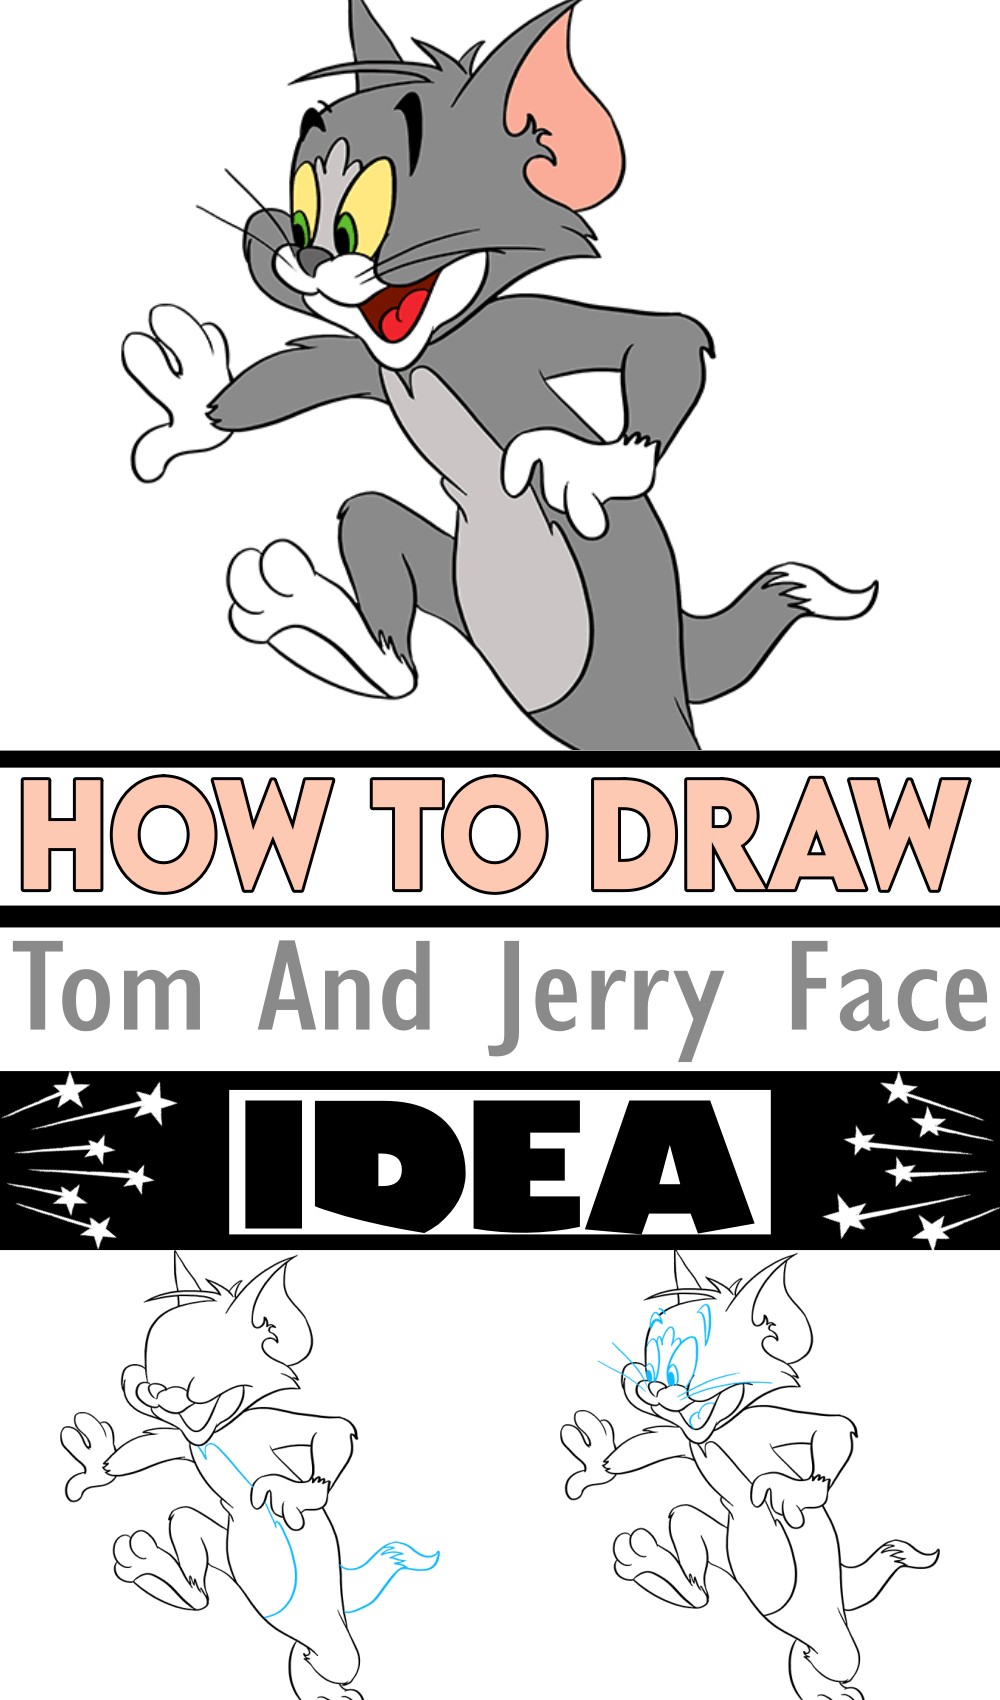 How To Draw Tom And Jerry Face